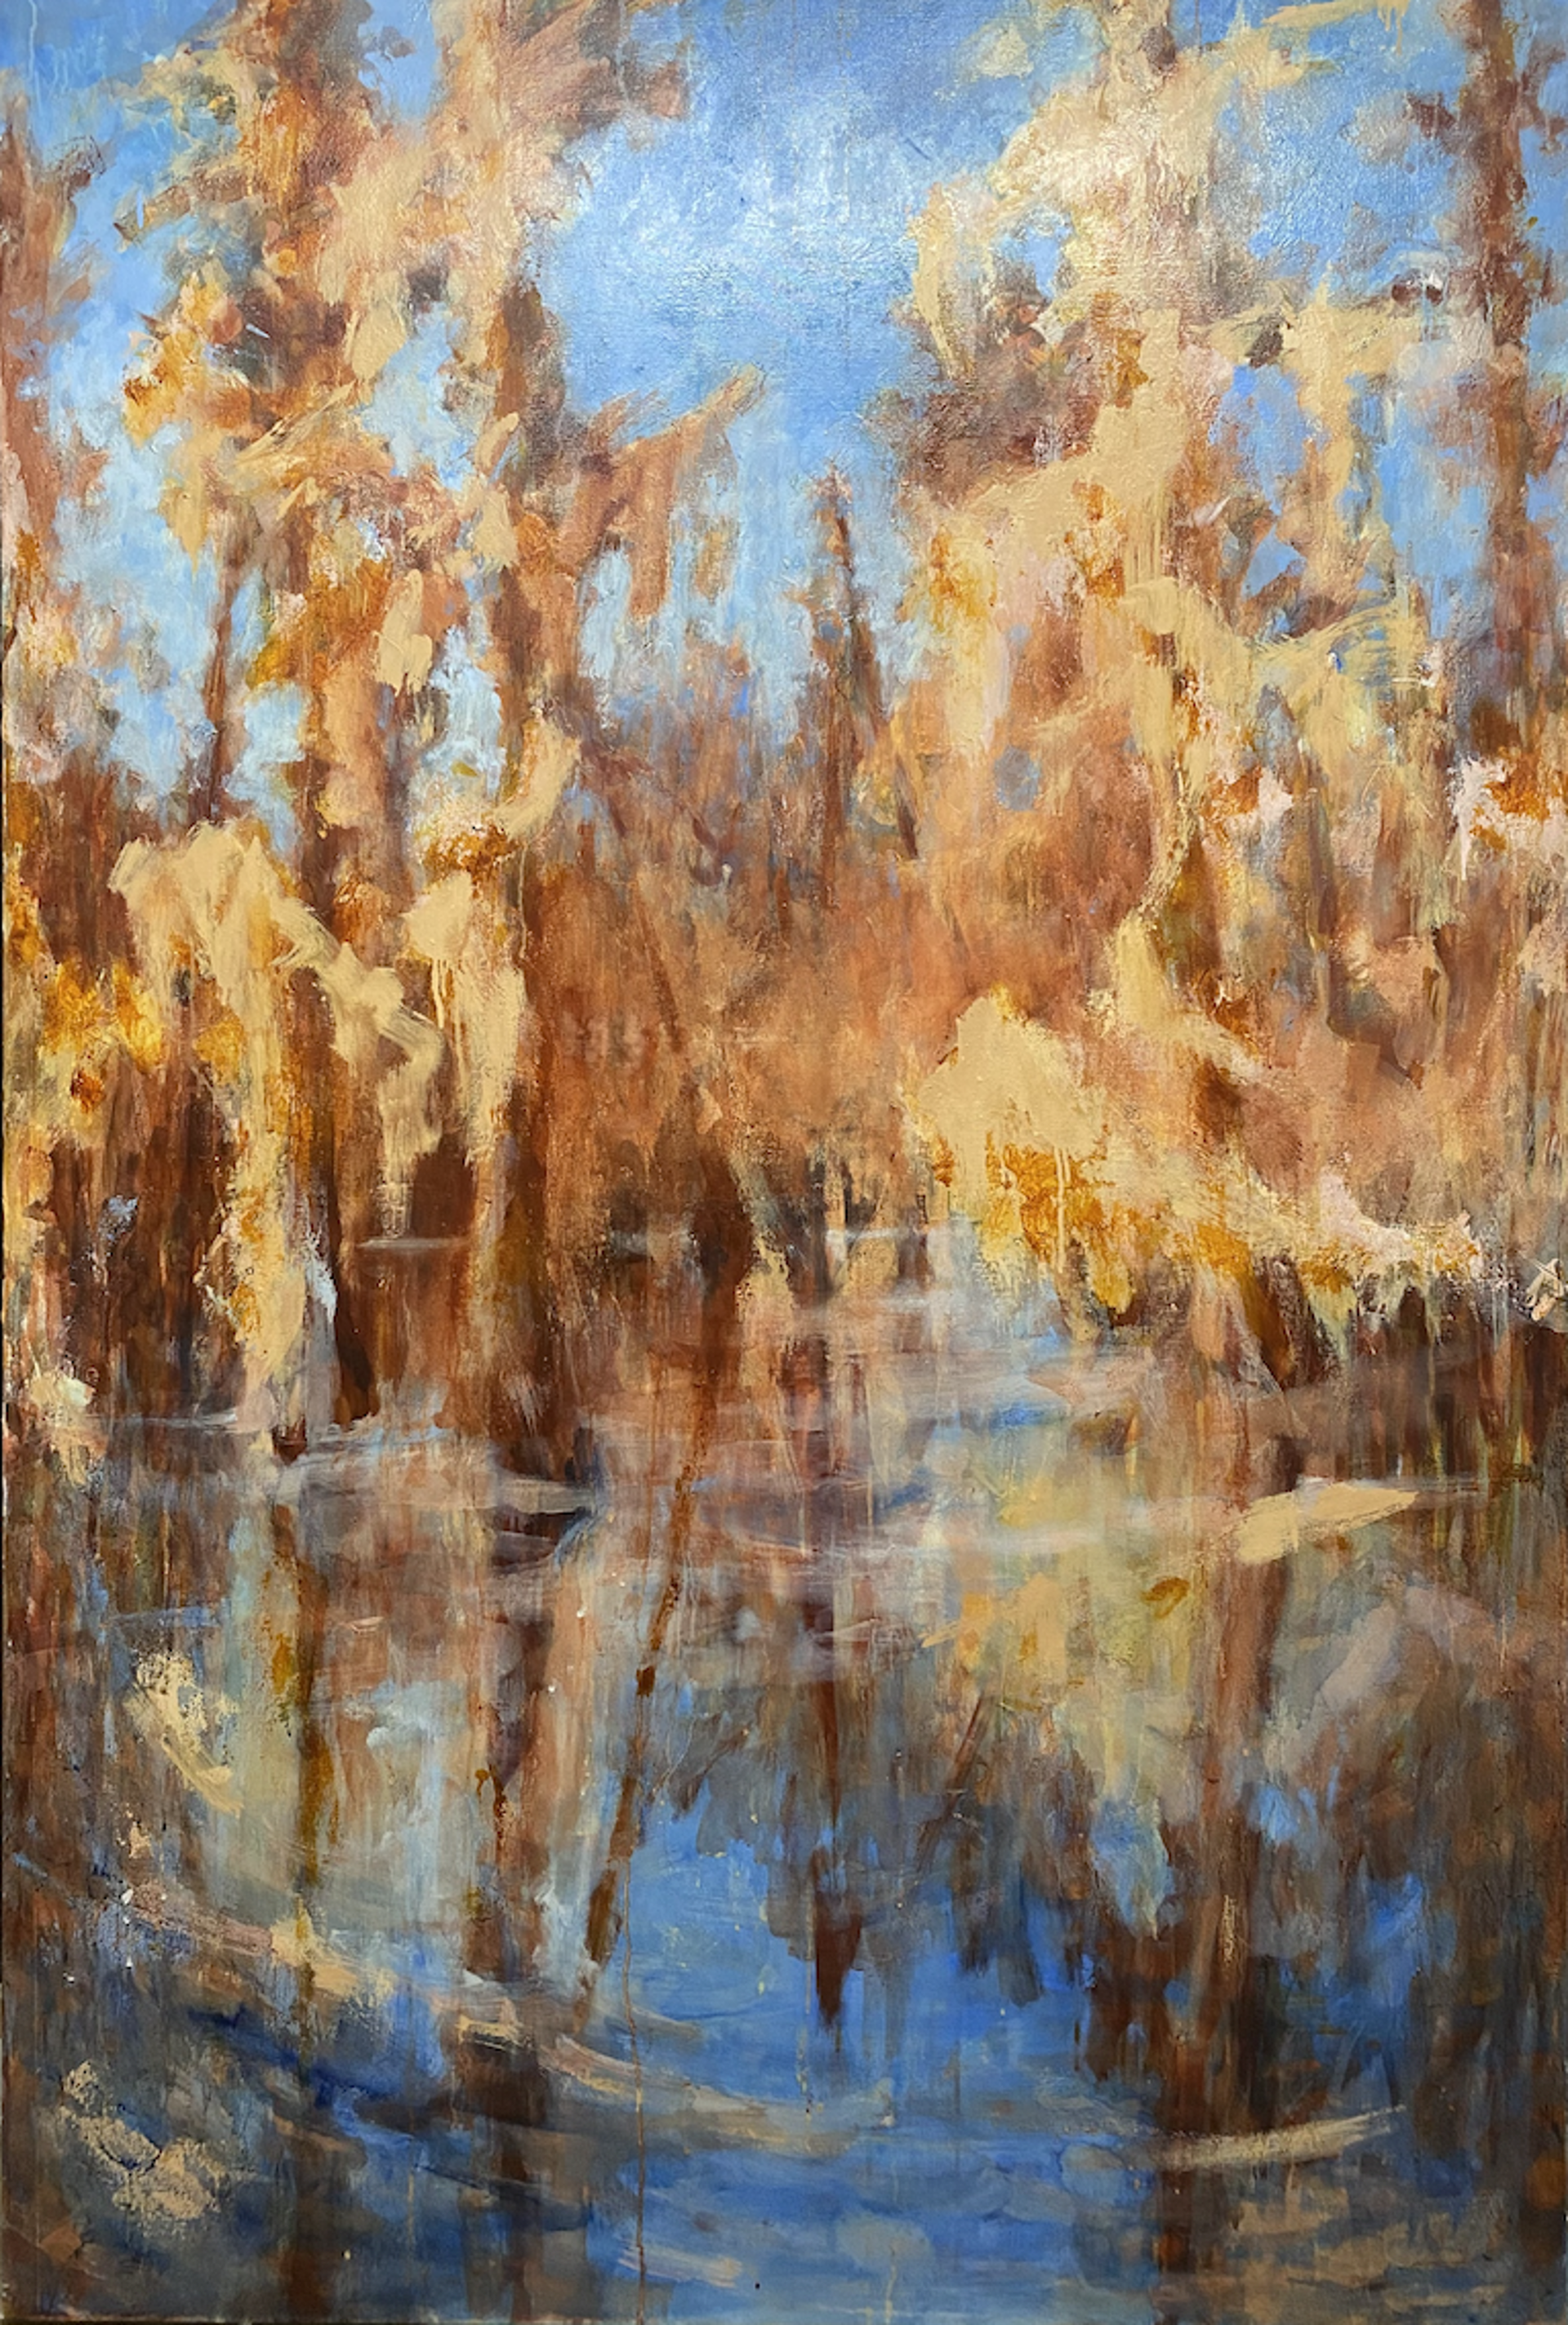 Congaree III by Mary Gilkerson